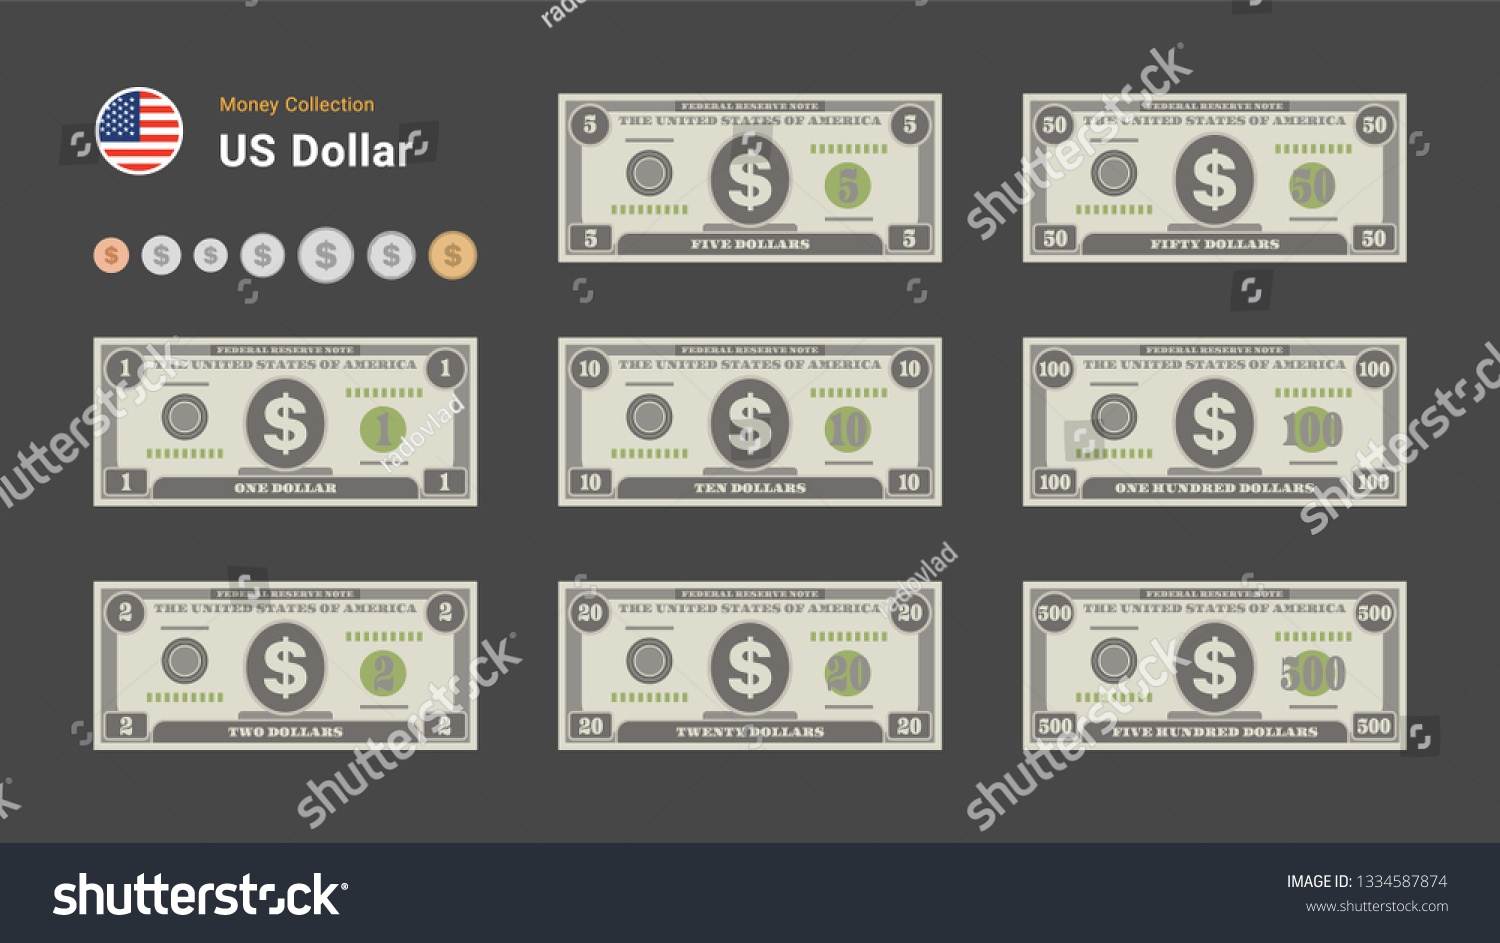 SVG of US Dollar bills. American money banknotes and coins. Currency vector set. Stylized drawing of bills. Flat vector illustration. svg